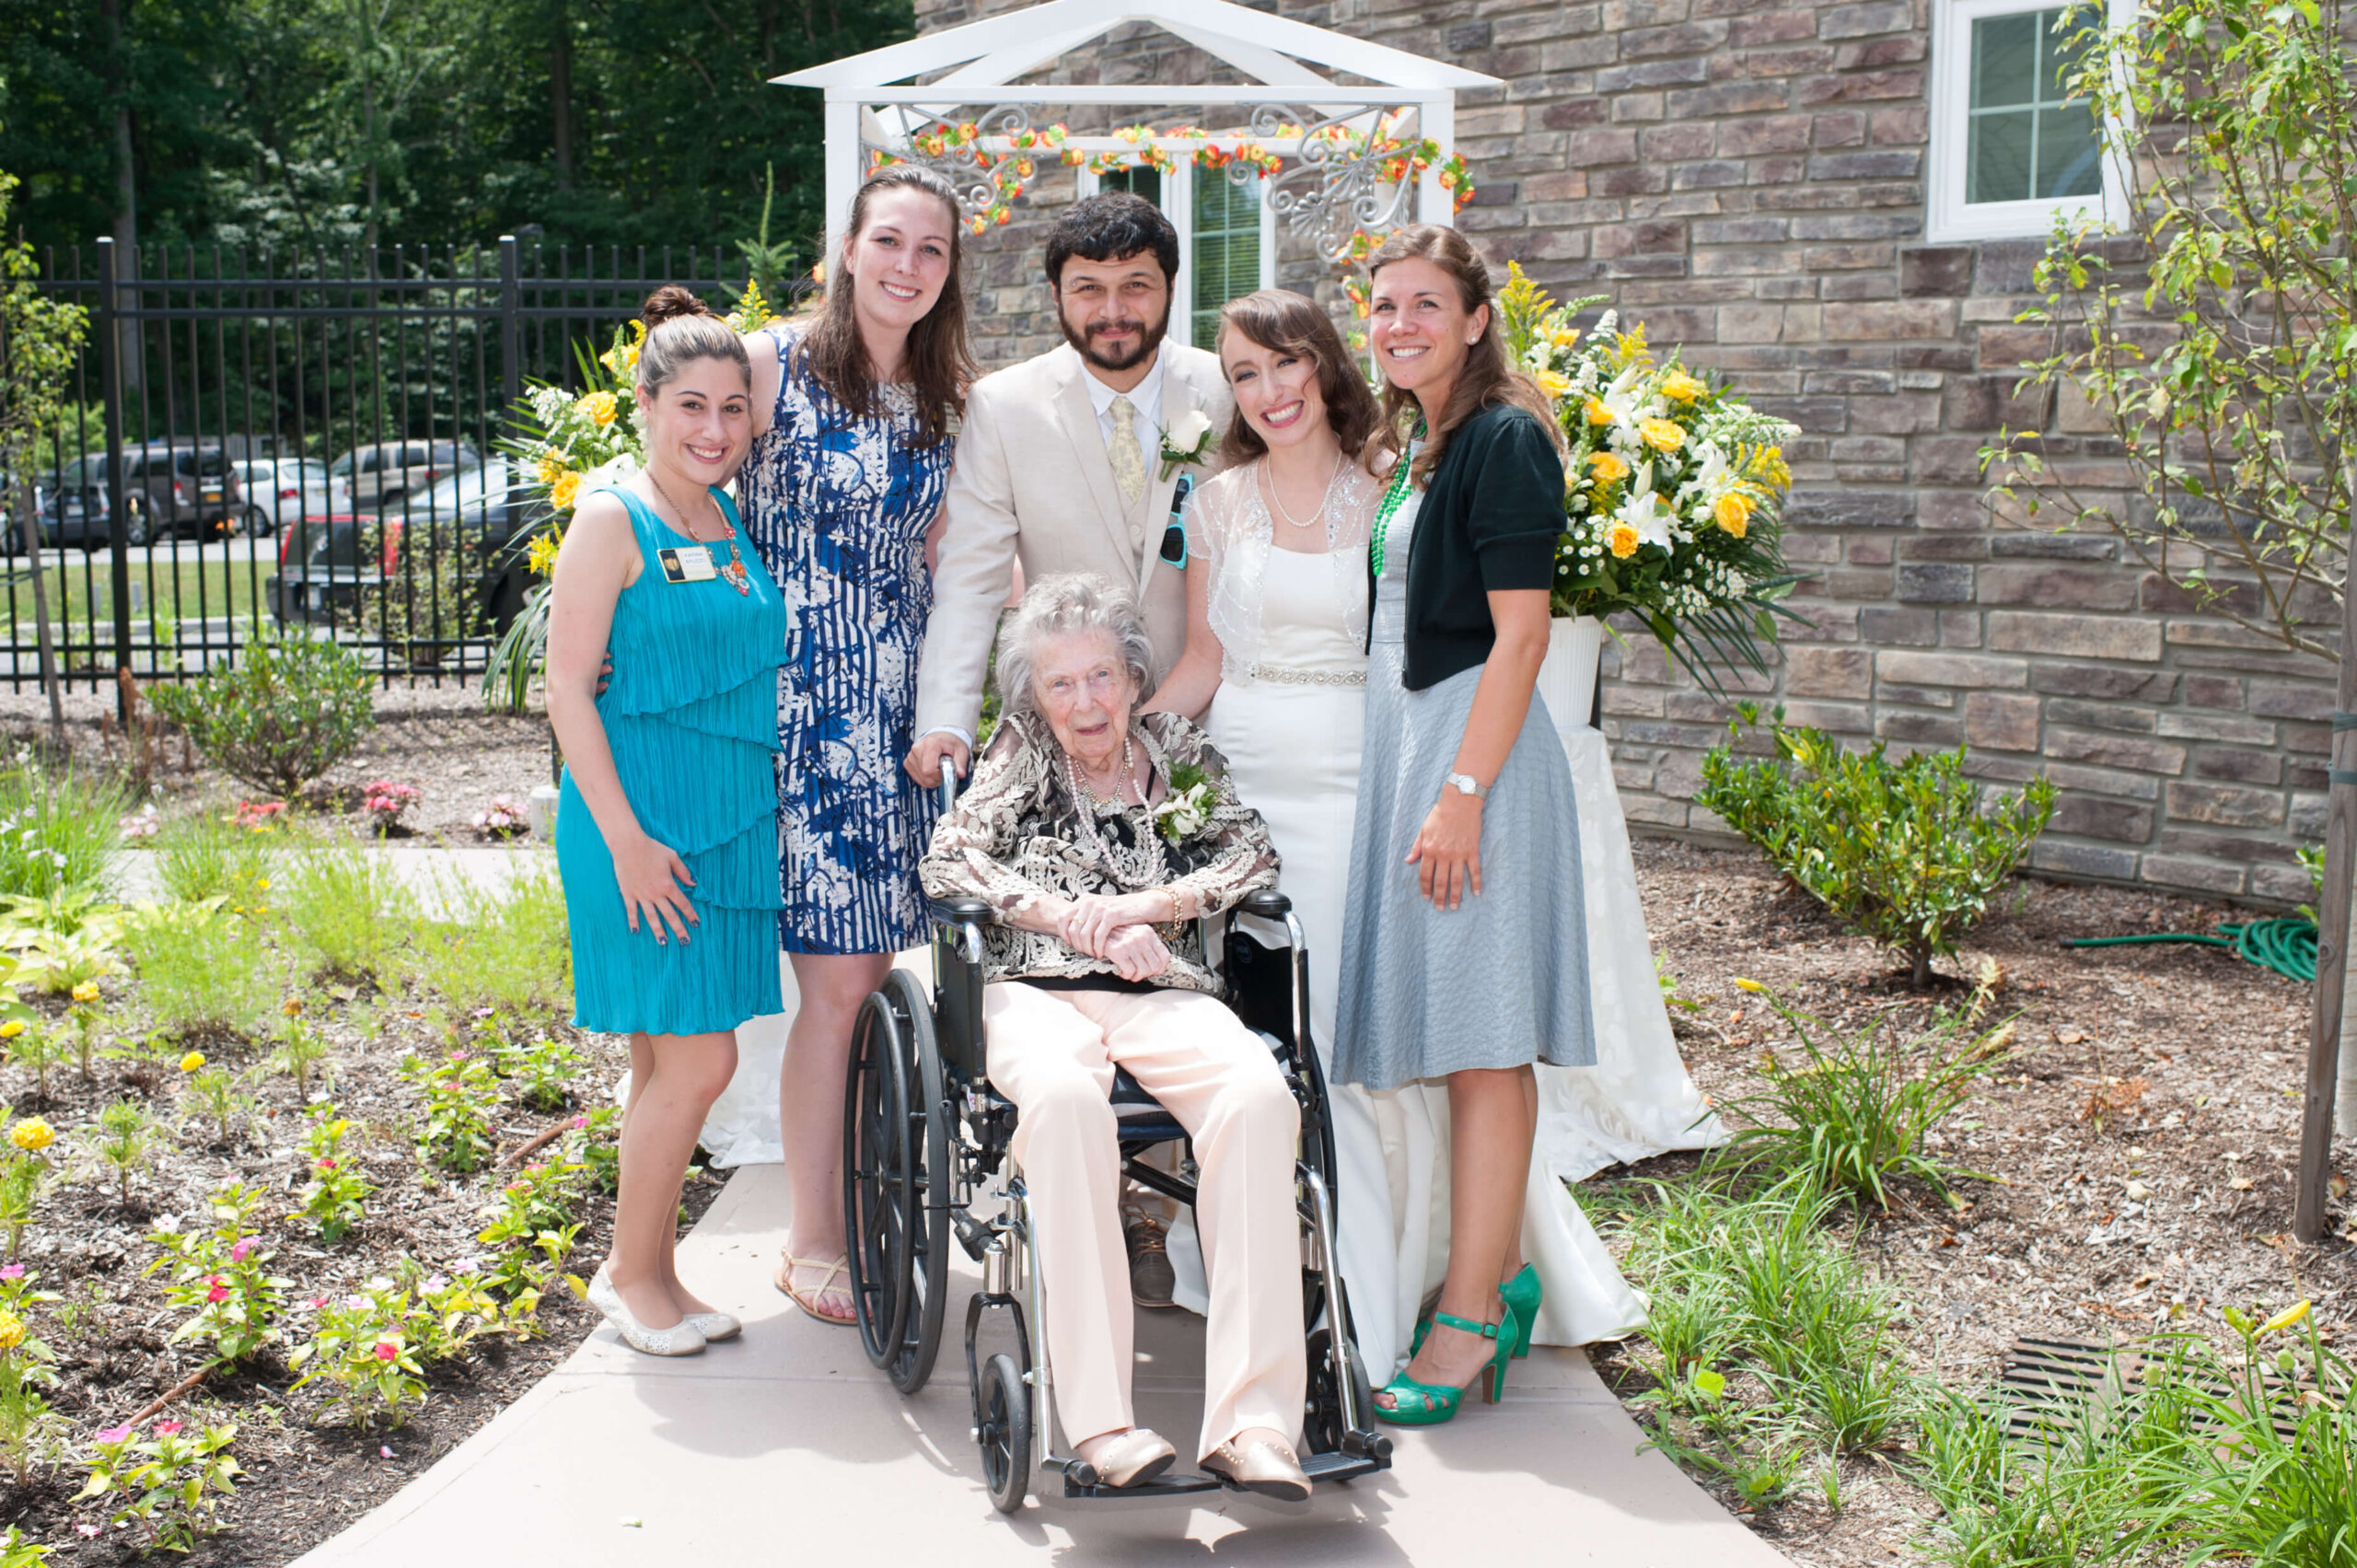 Wedding Bells at The Ambassador of Scarsdale: Love in the Age of Alzheimer’s